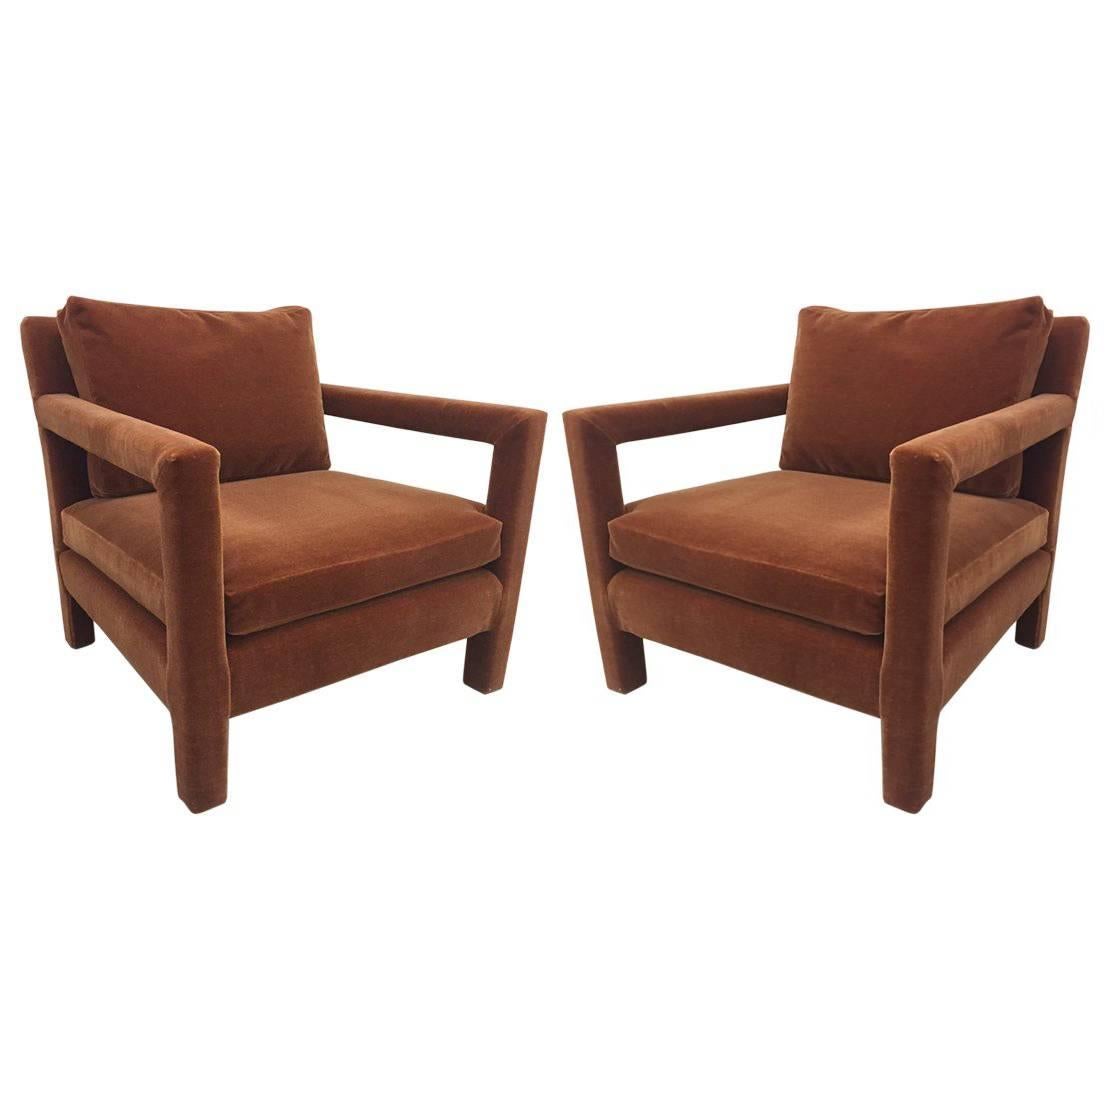 Pair of Milo Baughman Lounge Chairs in Mohair